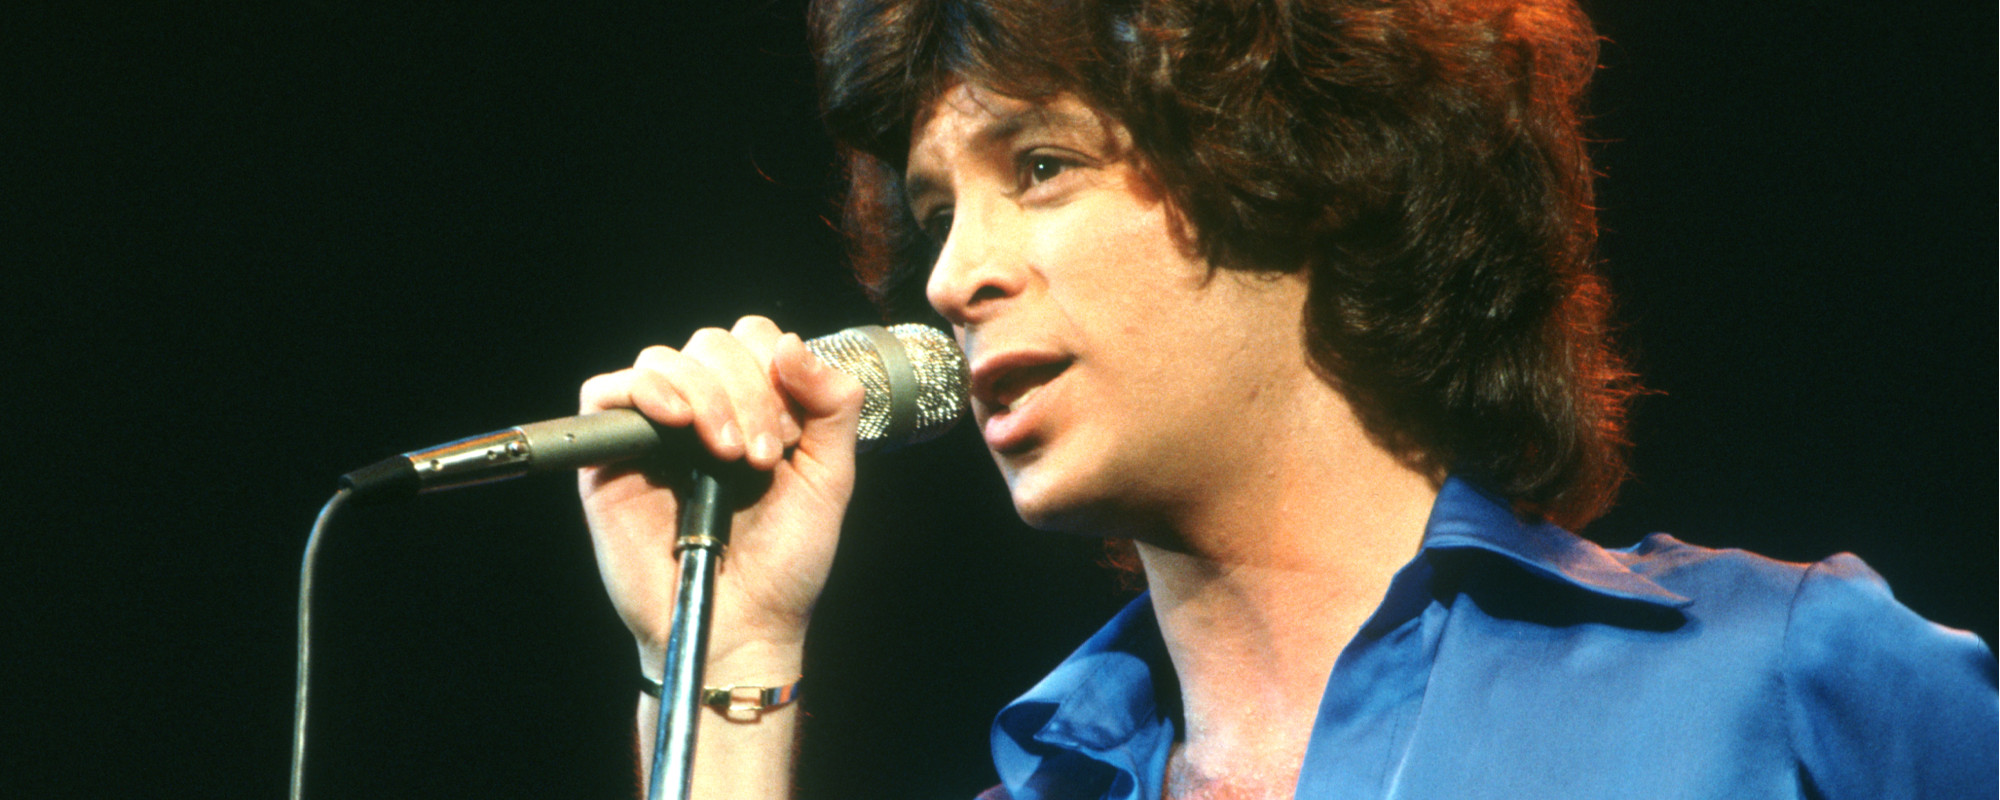 Paul Stanley, Stephen King, & More Pay Tribute to Raspberries Frontman Eric Carmen, Dead at 74